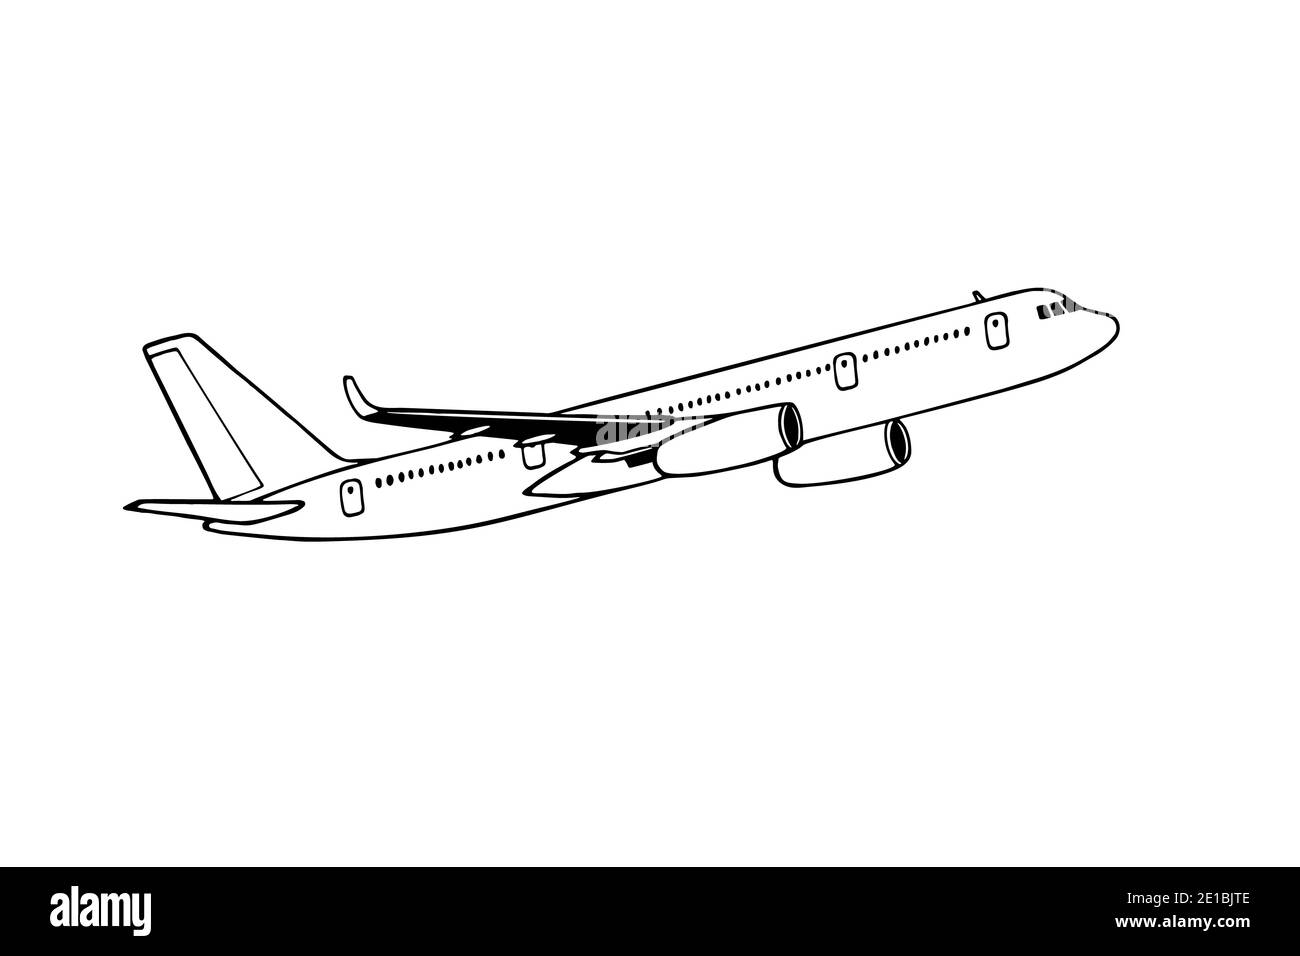 Jetliner hand drawn realistic doodle sketch tracing vector llustration. Airline Concept Travel Passenger plane. Jet commercial airplane. Stock Photo